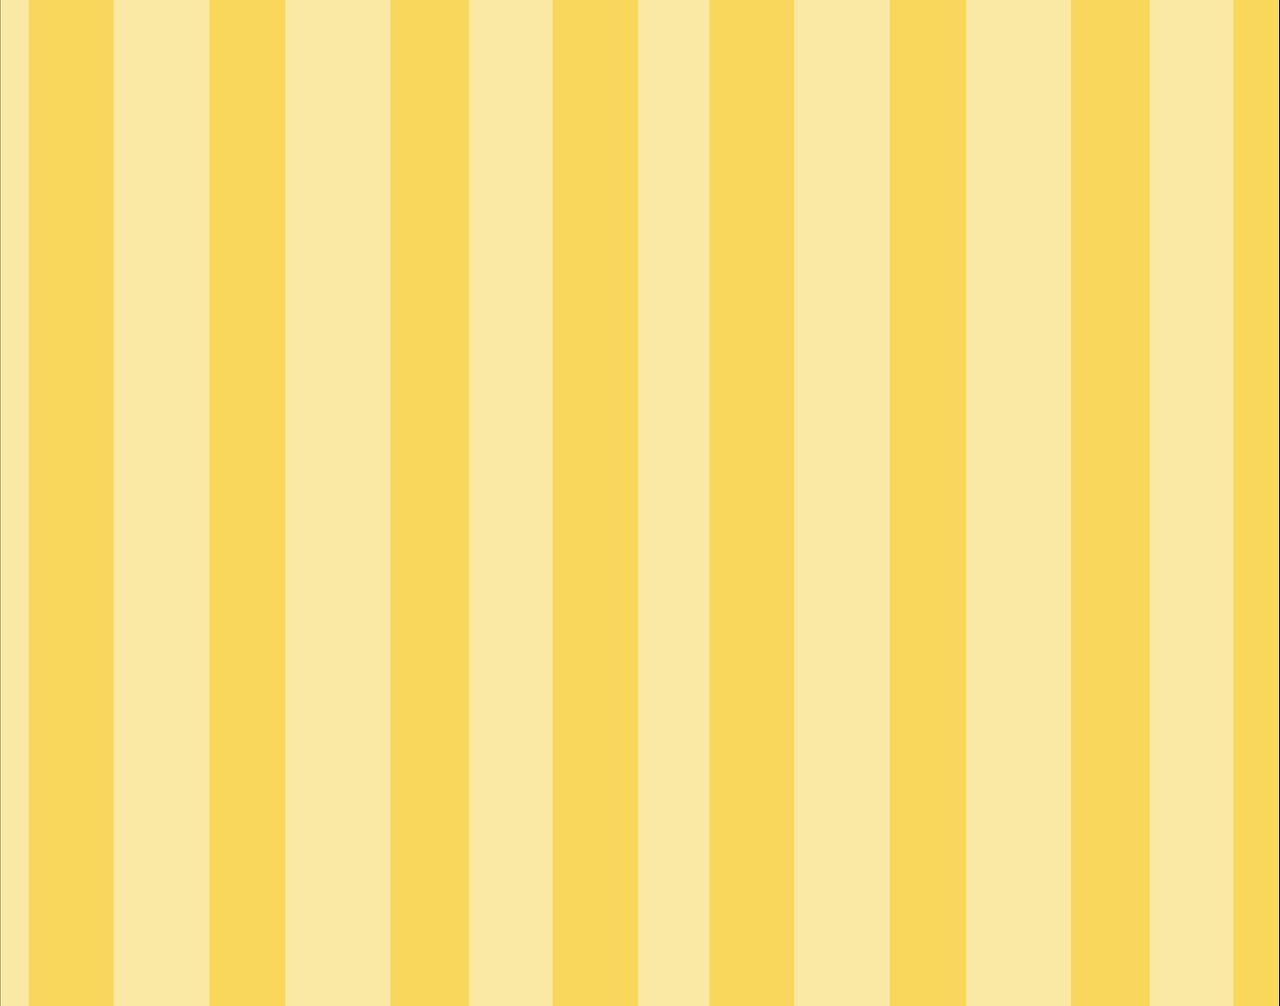 Free download Solid Yellow Color Backgrounds Yellow solid c